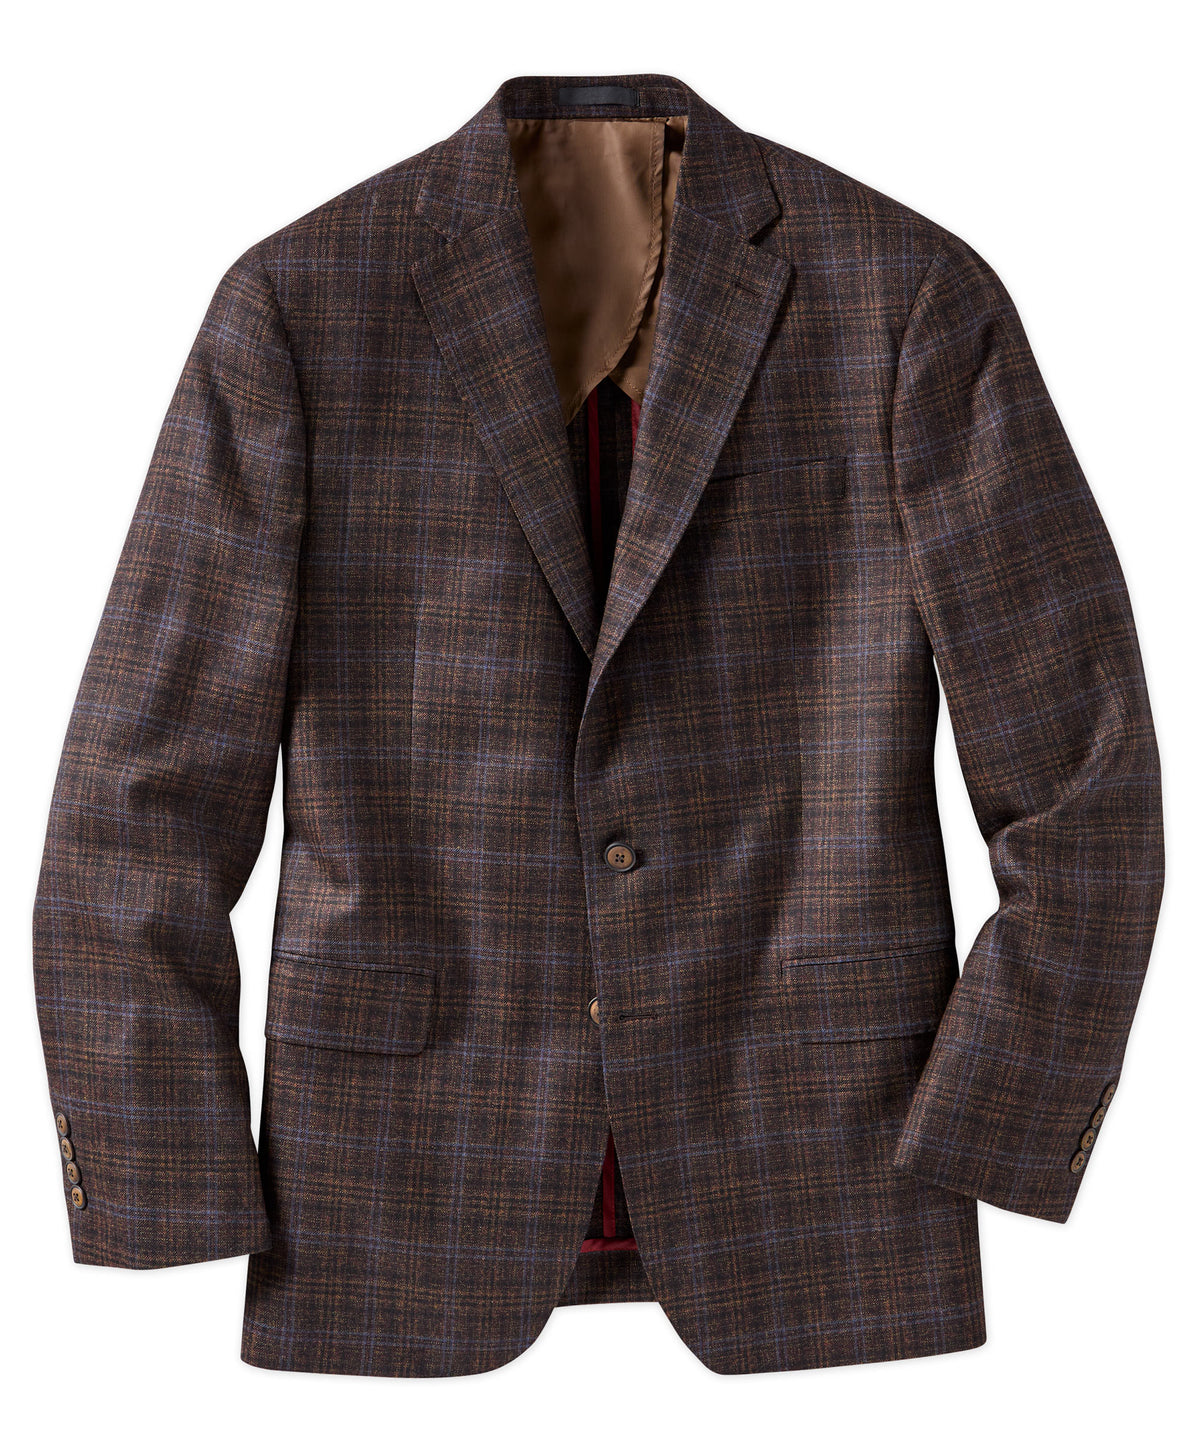 Wool Graphic Check Sport Coat